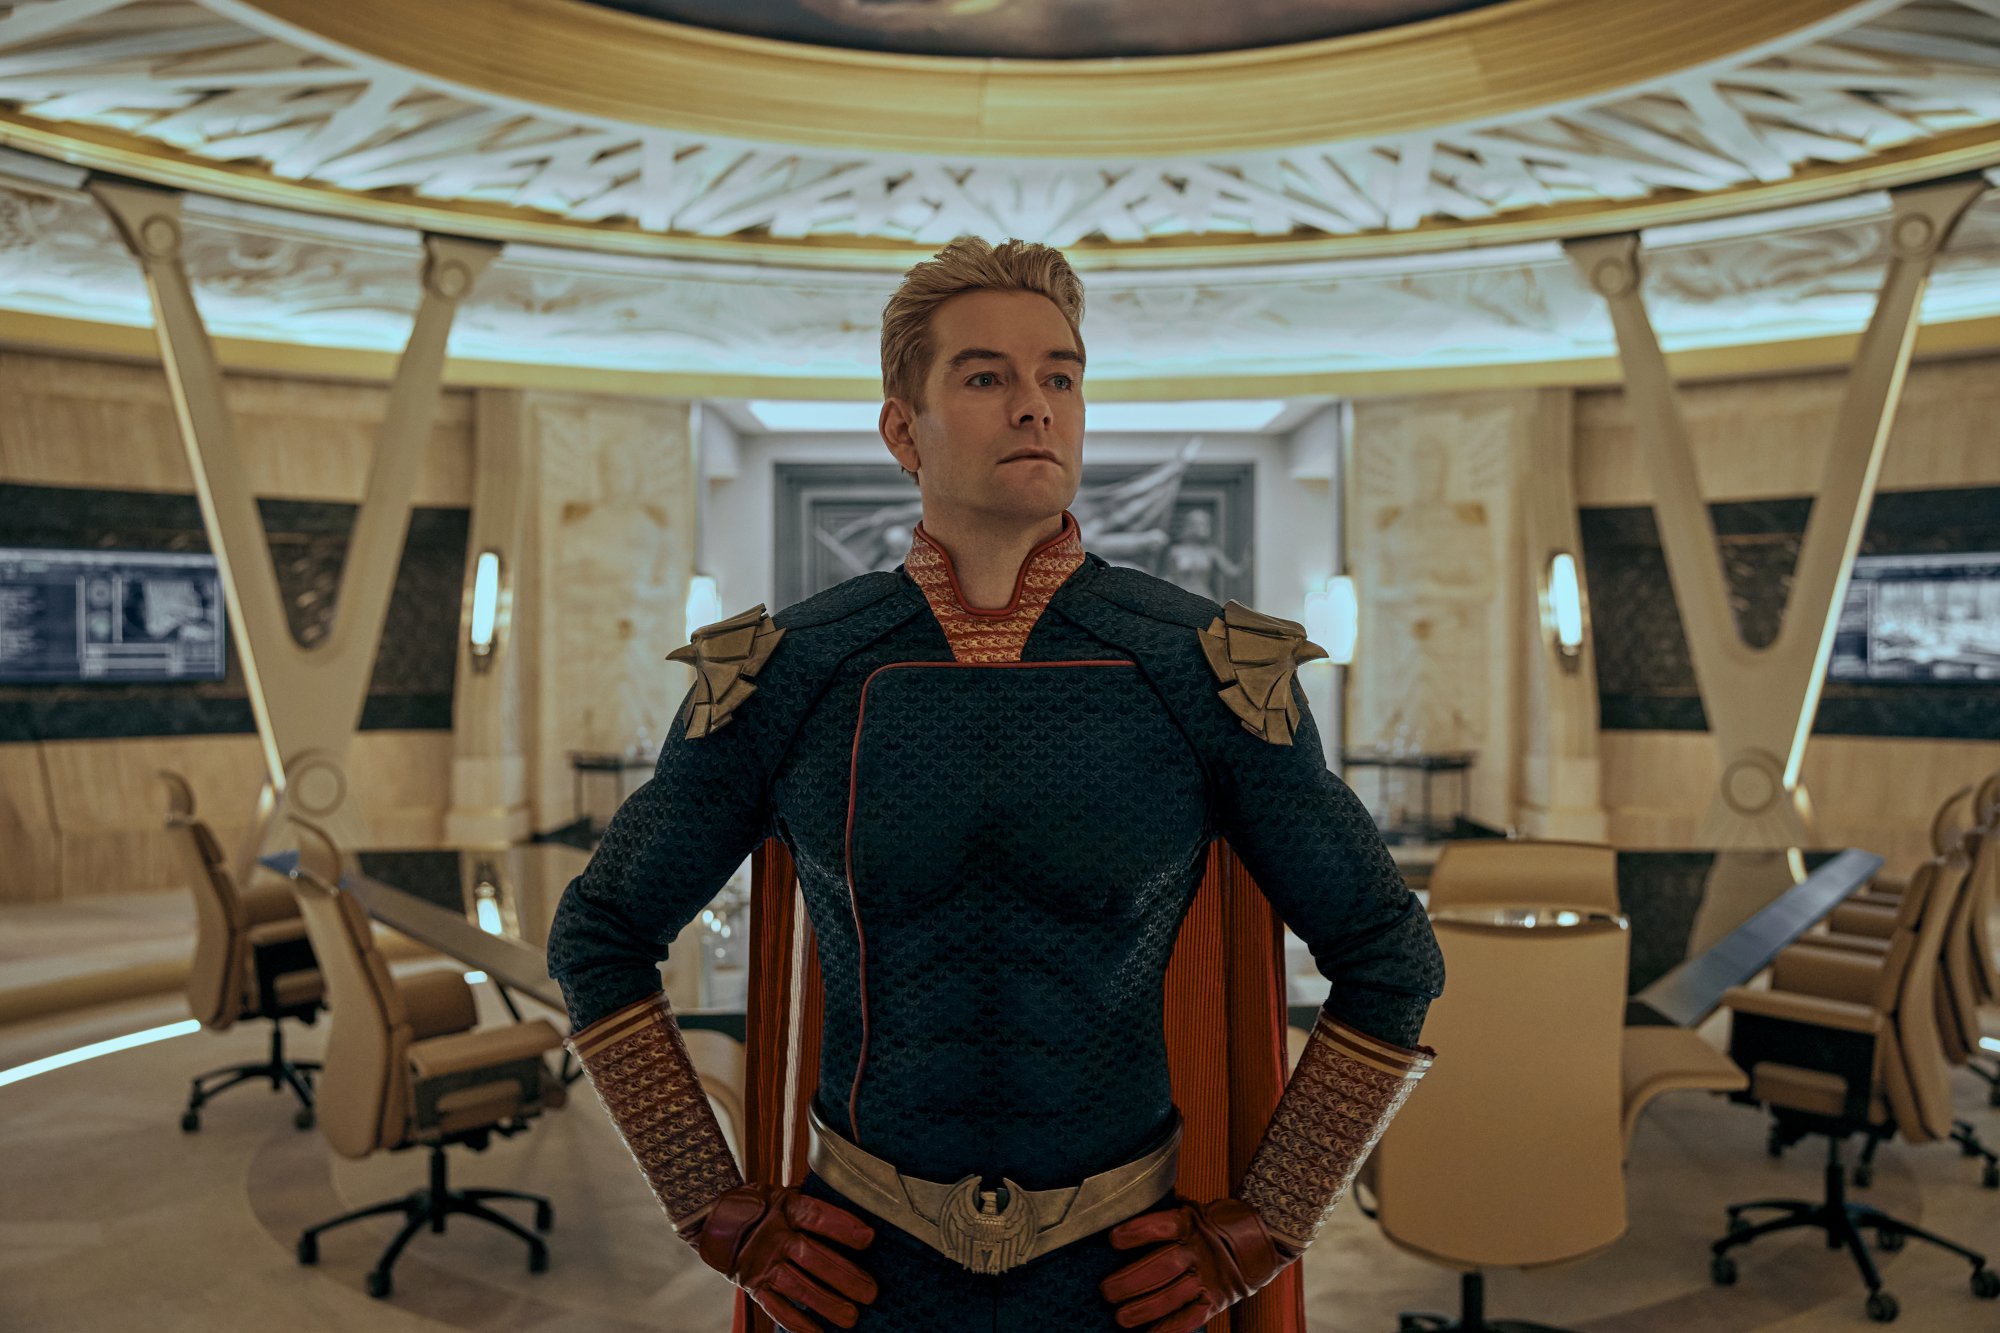 Antony Starr as Homelander in 'The Boys' Season 3, which has a release date of June 3. He's standing in a conference room, and his hands are on his hips.